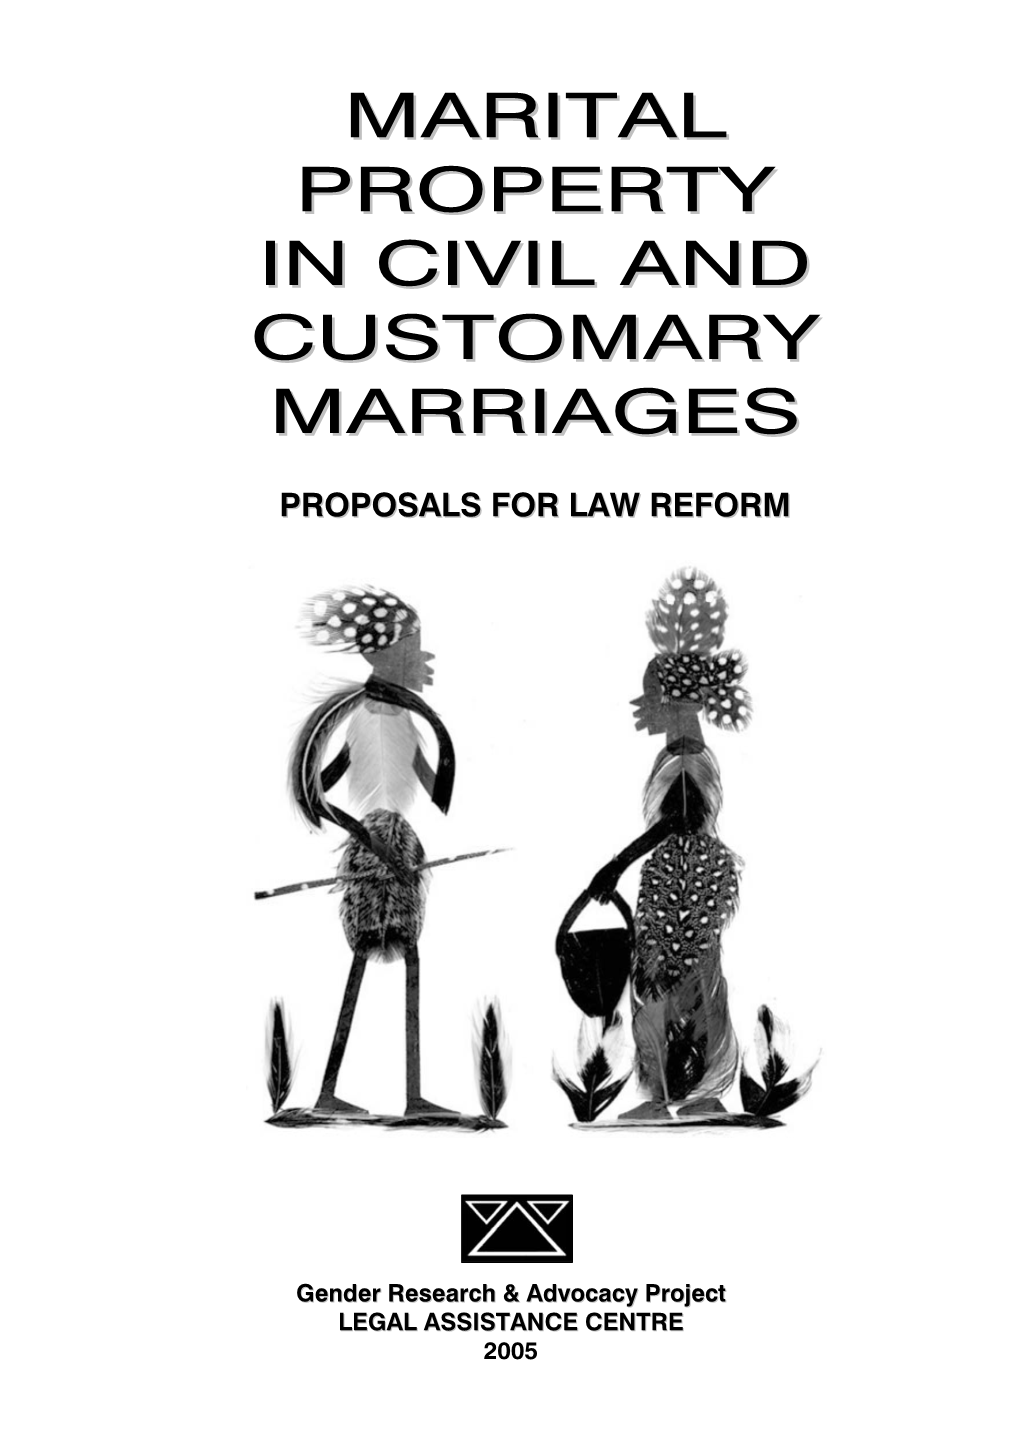 Marital Property in Civil and Customary Marriages